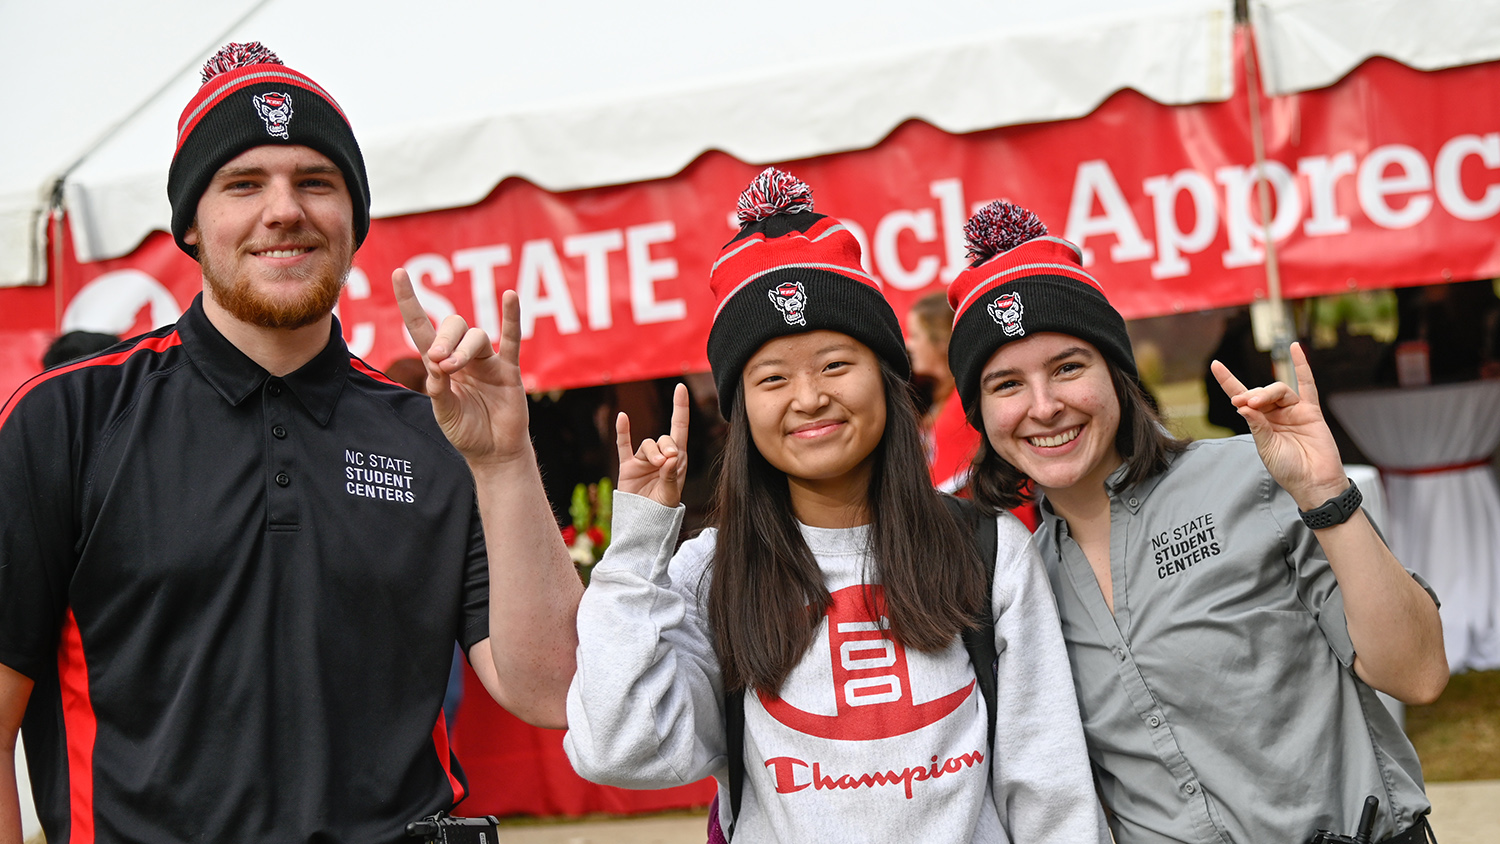 Two employees and a student, wearing matching NC State beanies, pose outside with wolfies up during Pack Appreciation Day.